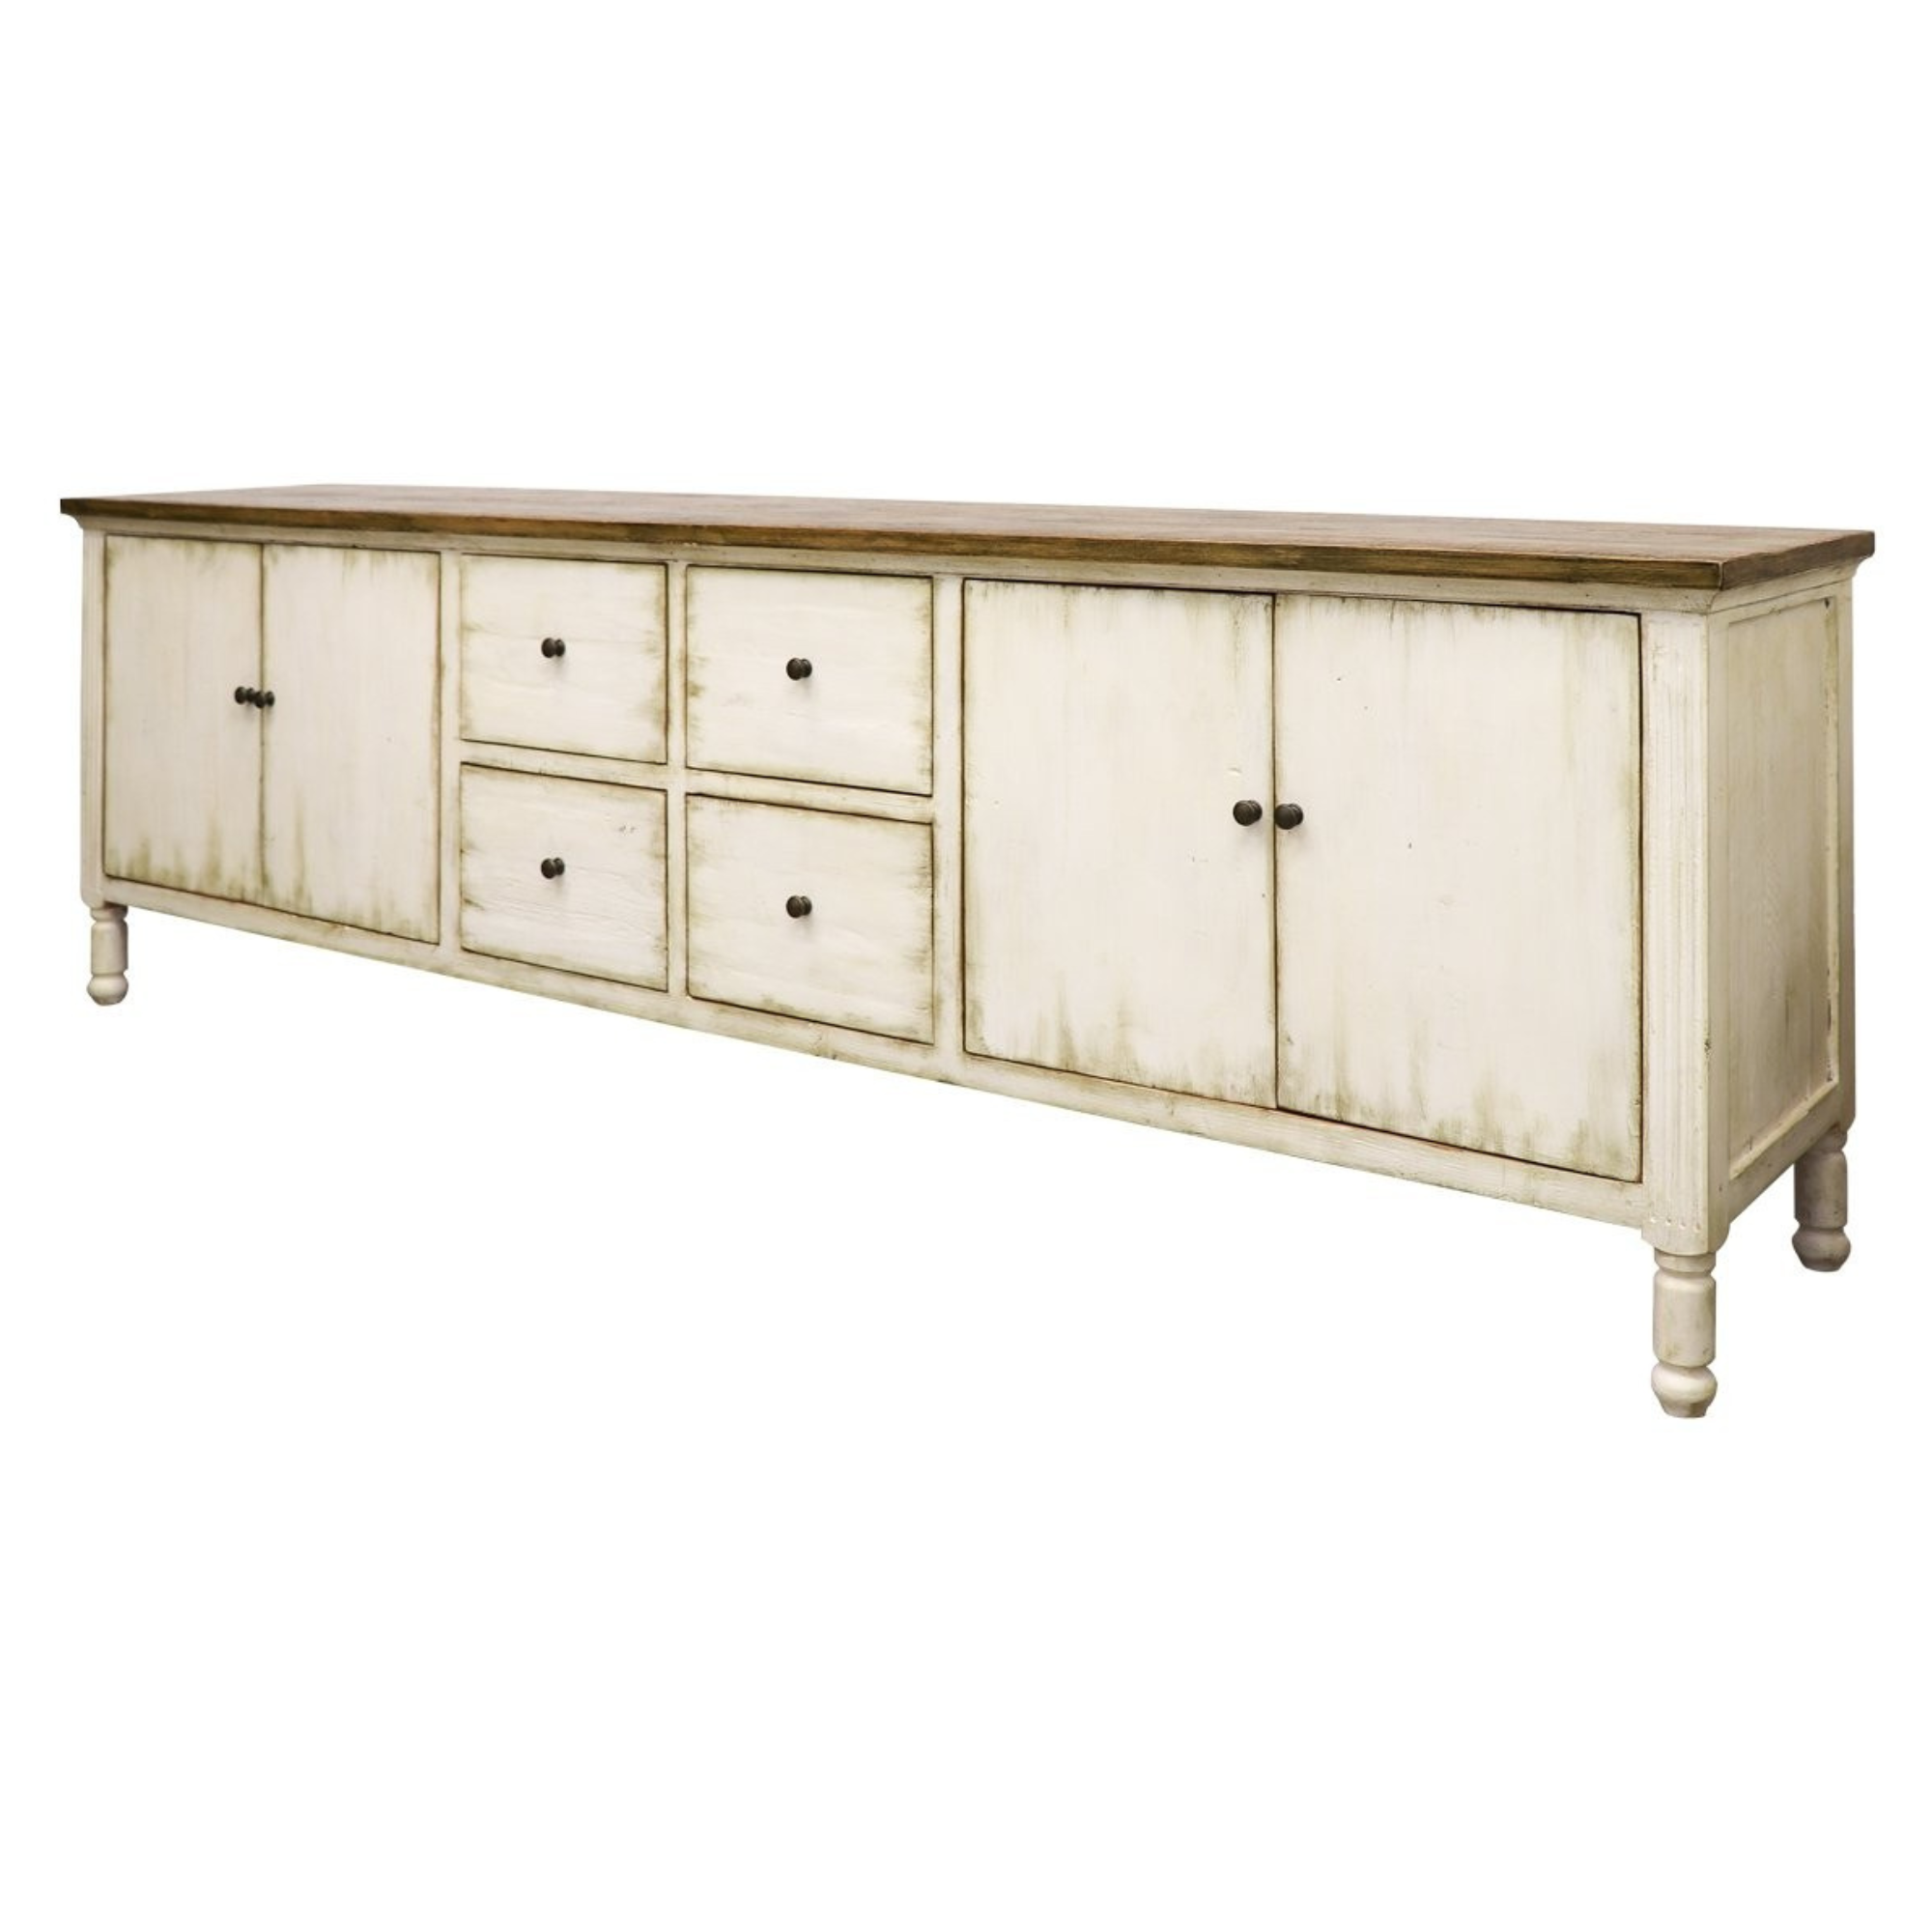 LIMITED EDITION LONG BUFFET 4 DOOR | 4 DRAWER